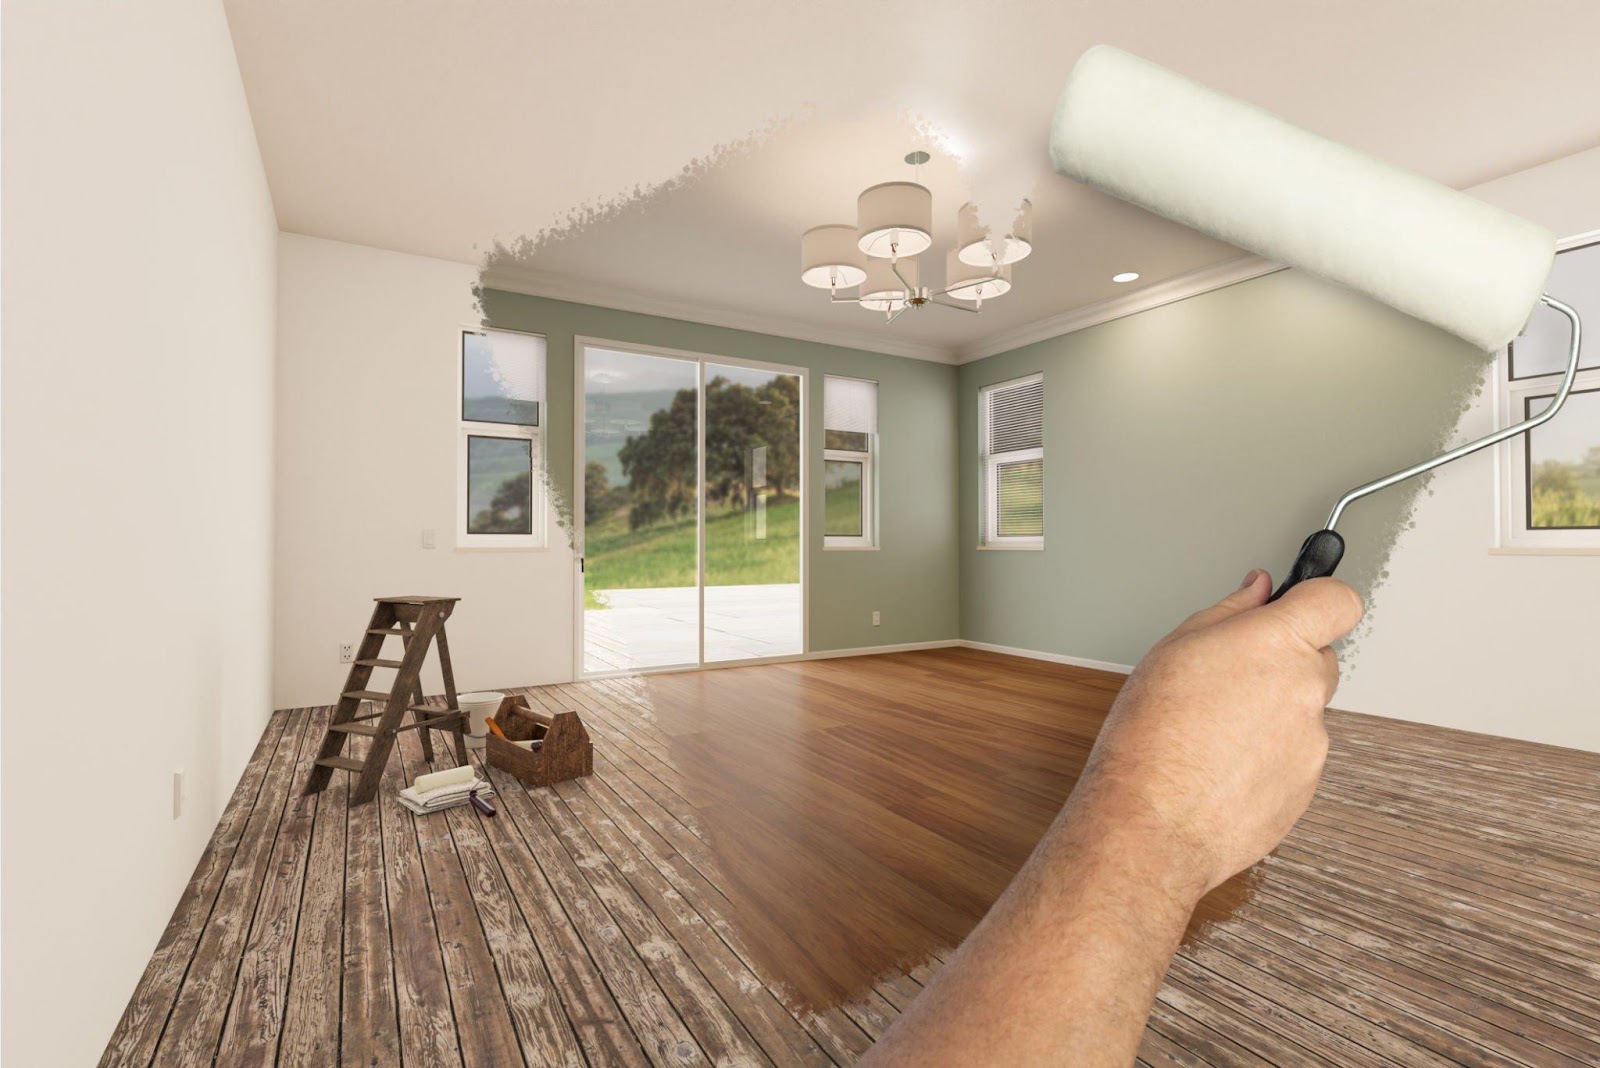 professional Painting Services in Dubai